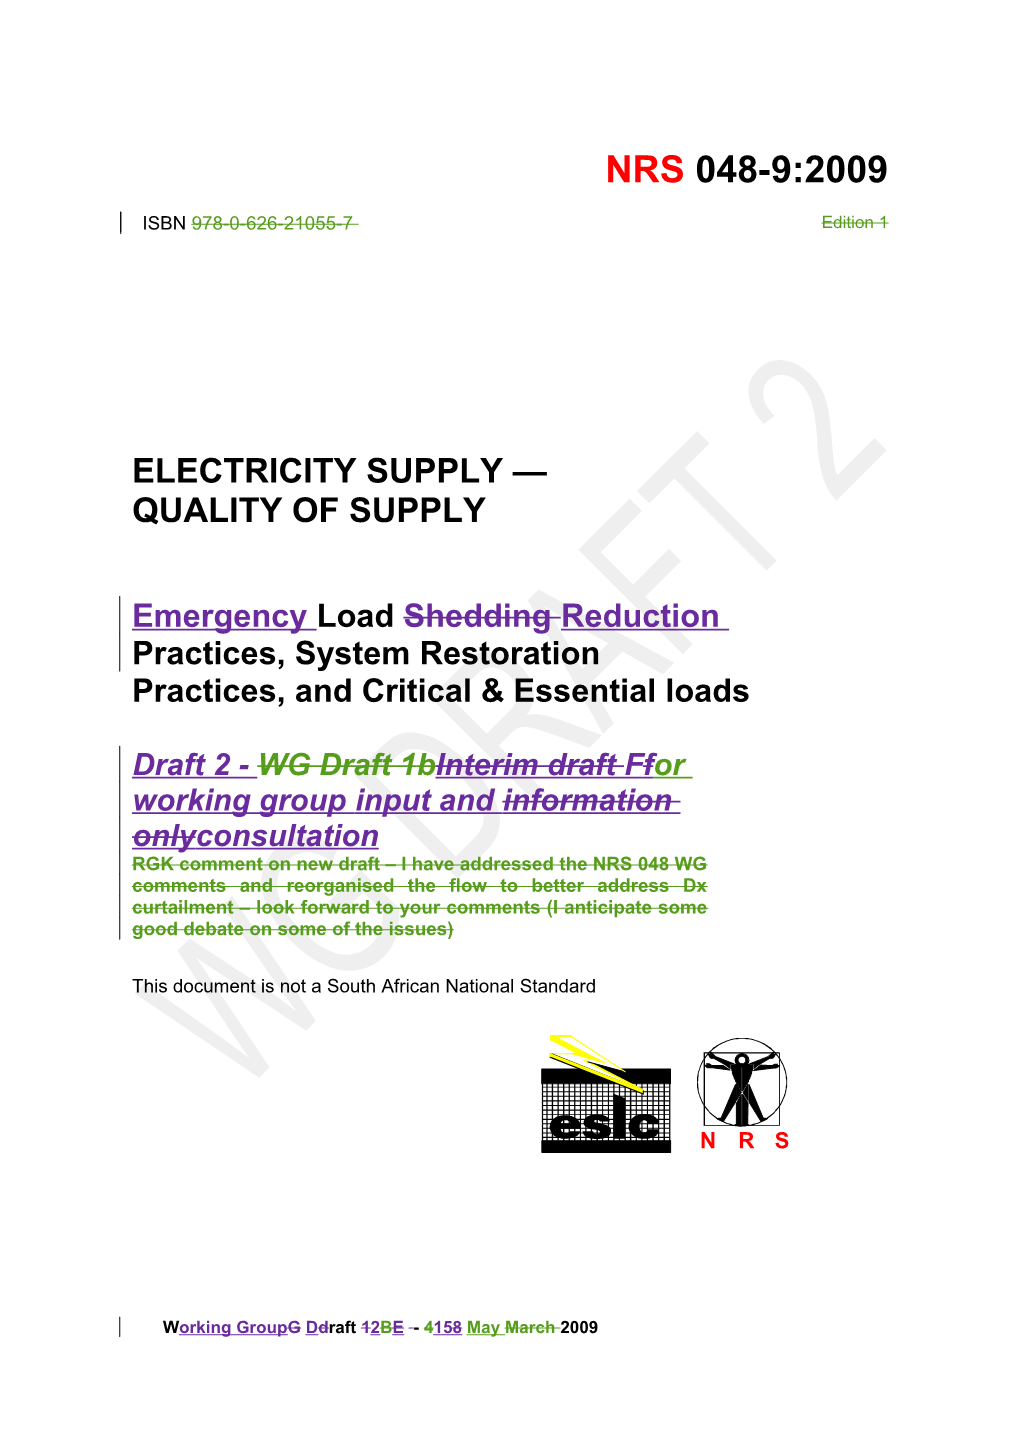 Electricity Supply